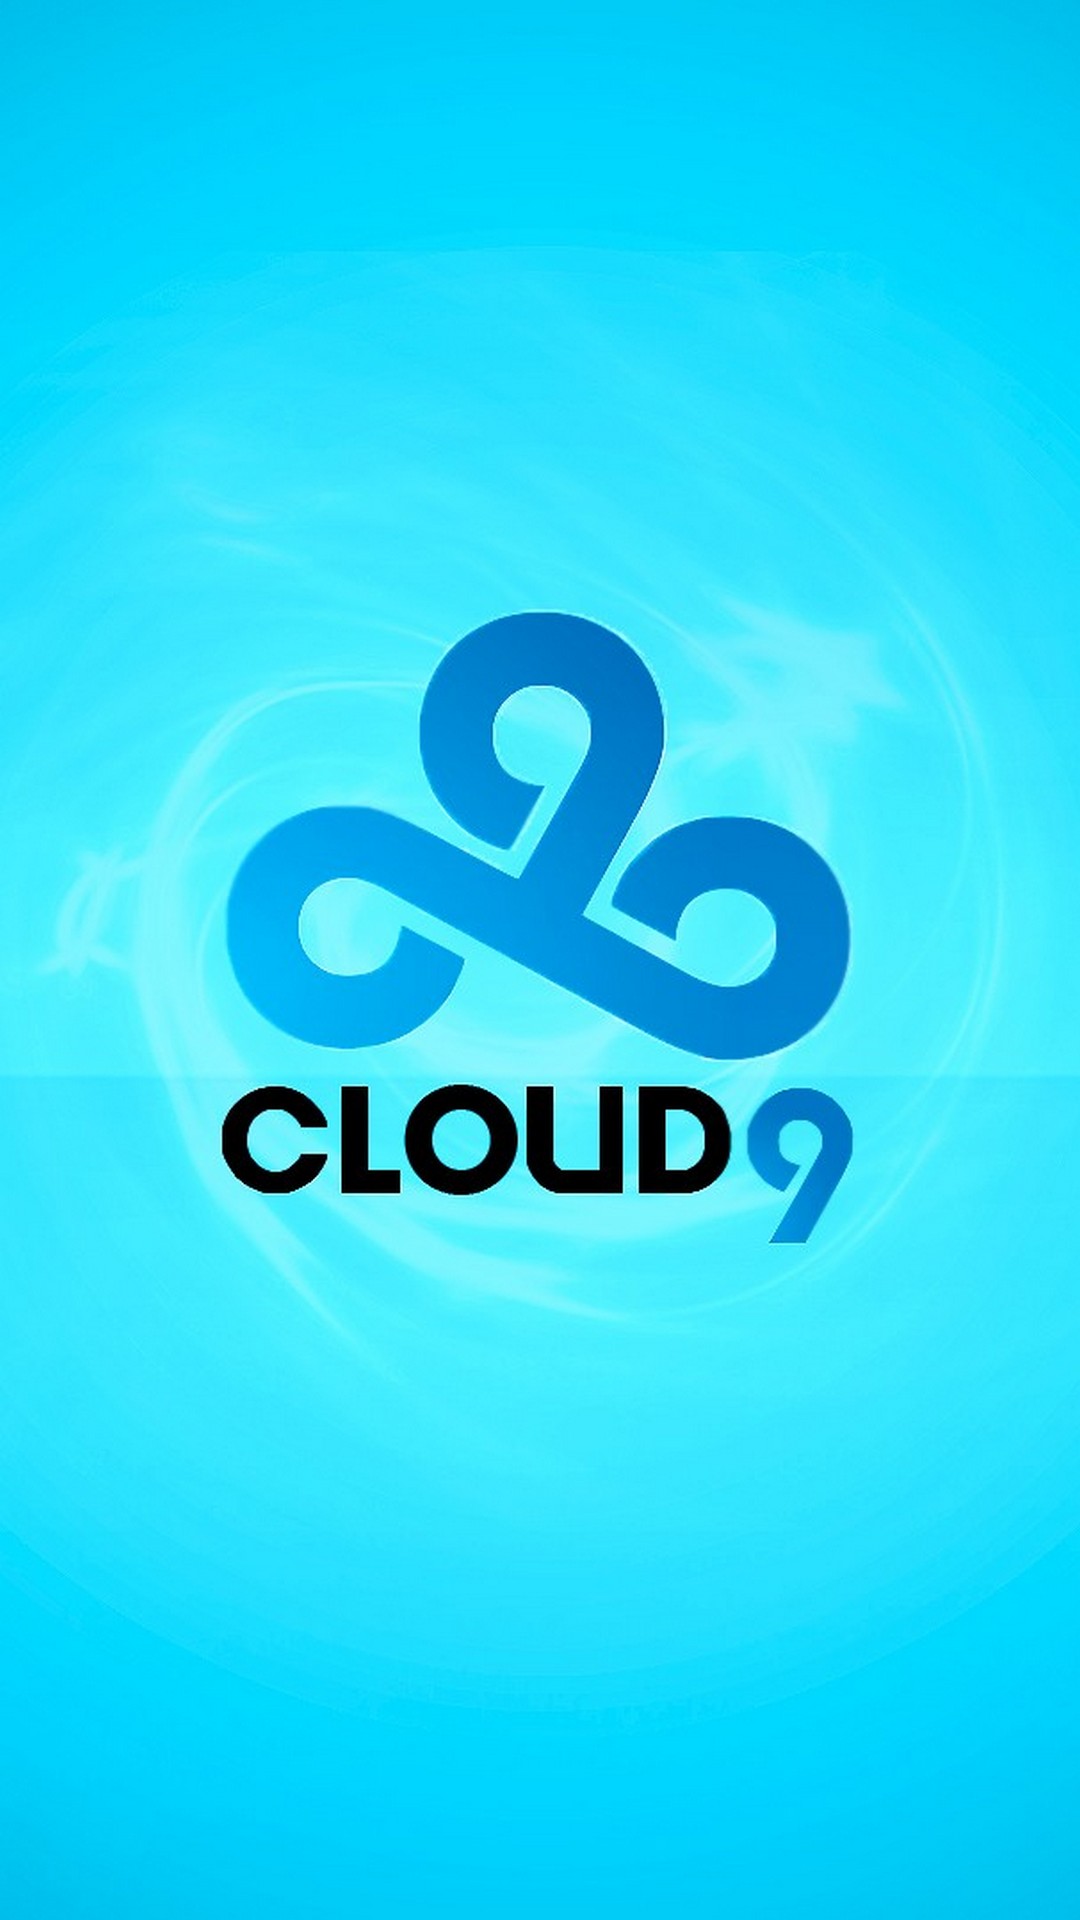 Wallpaper Android Cloud 9 with HD resolution 1080x1920